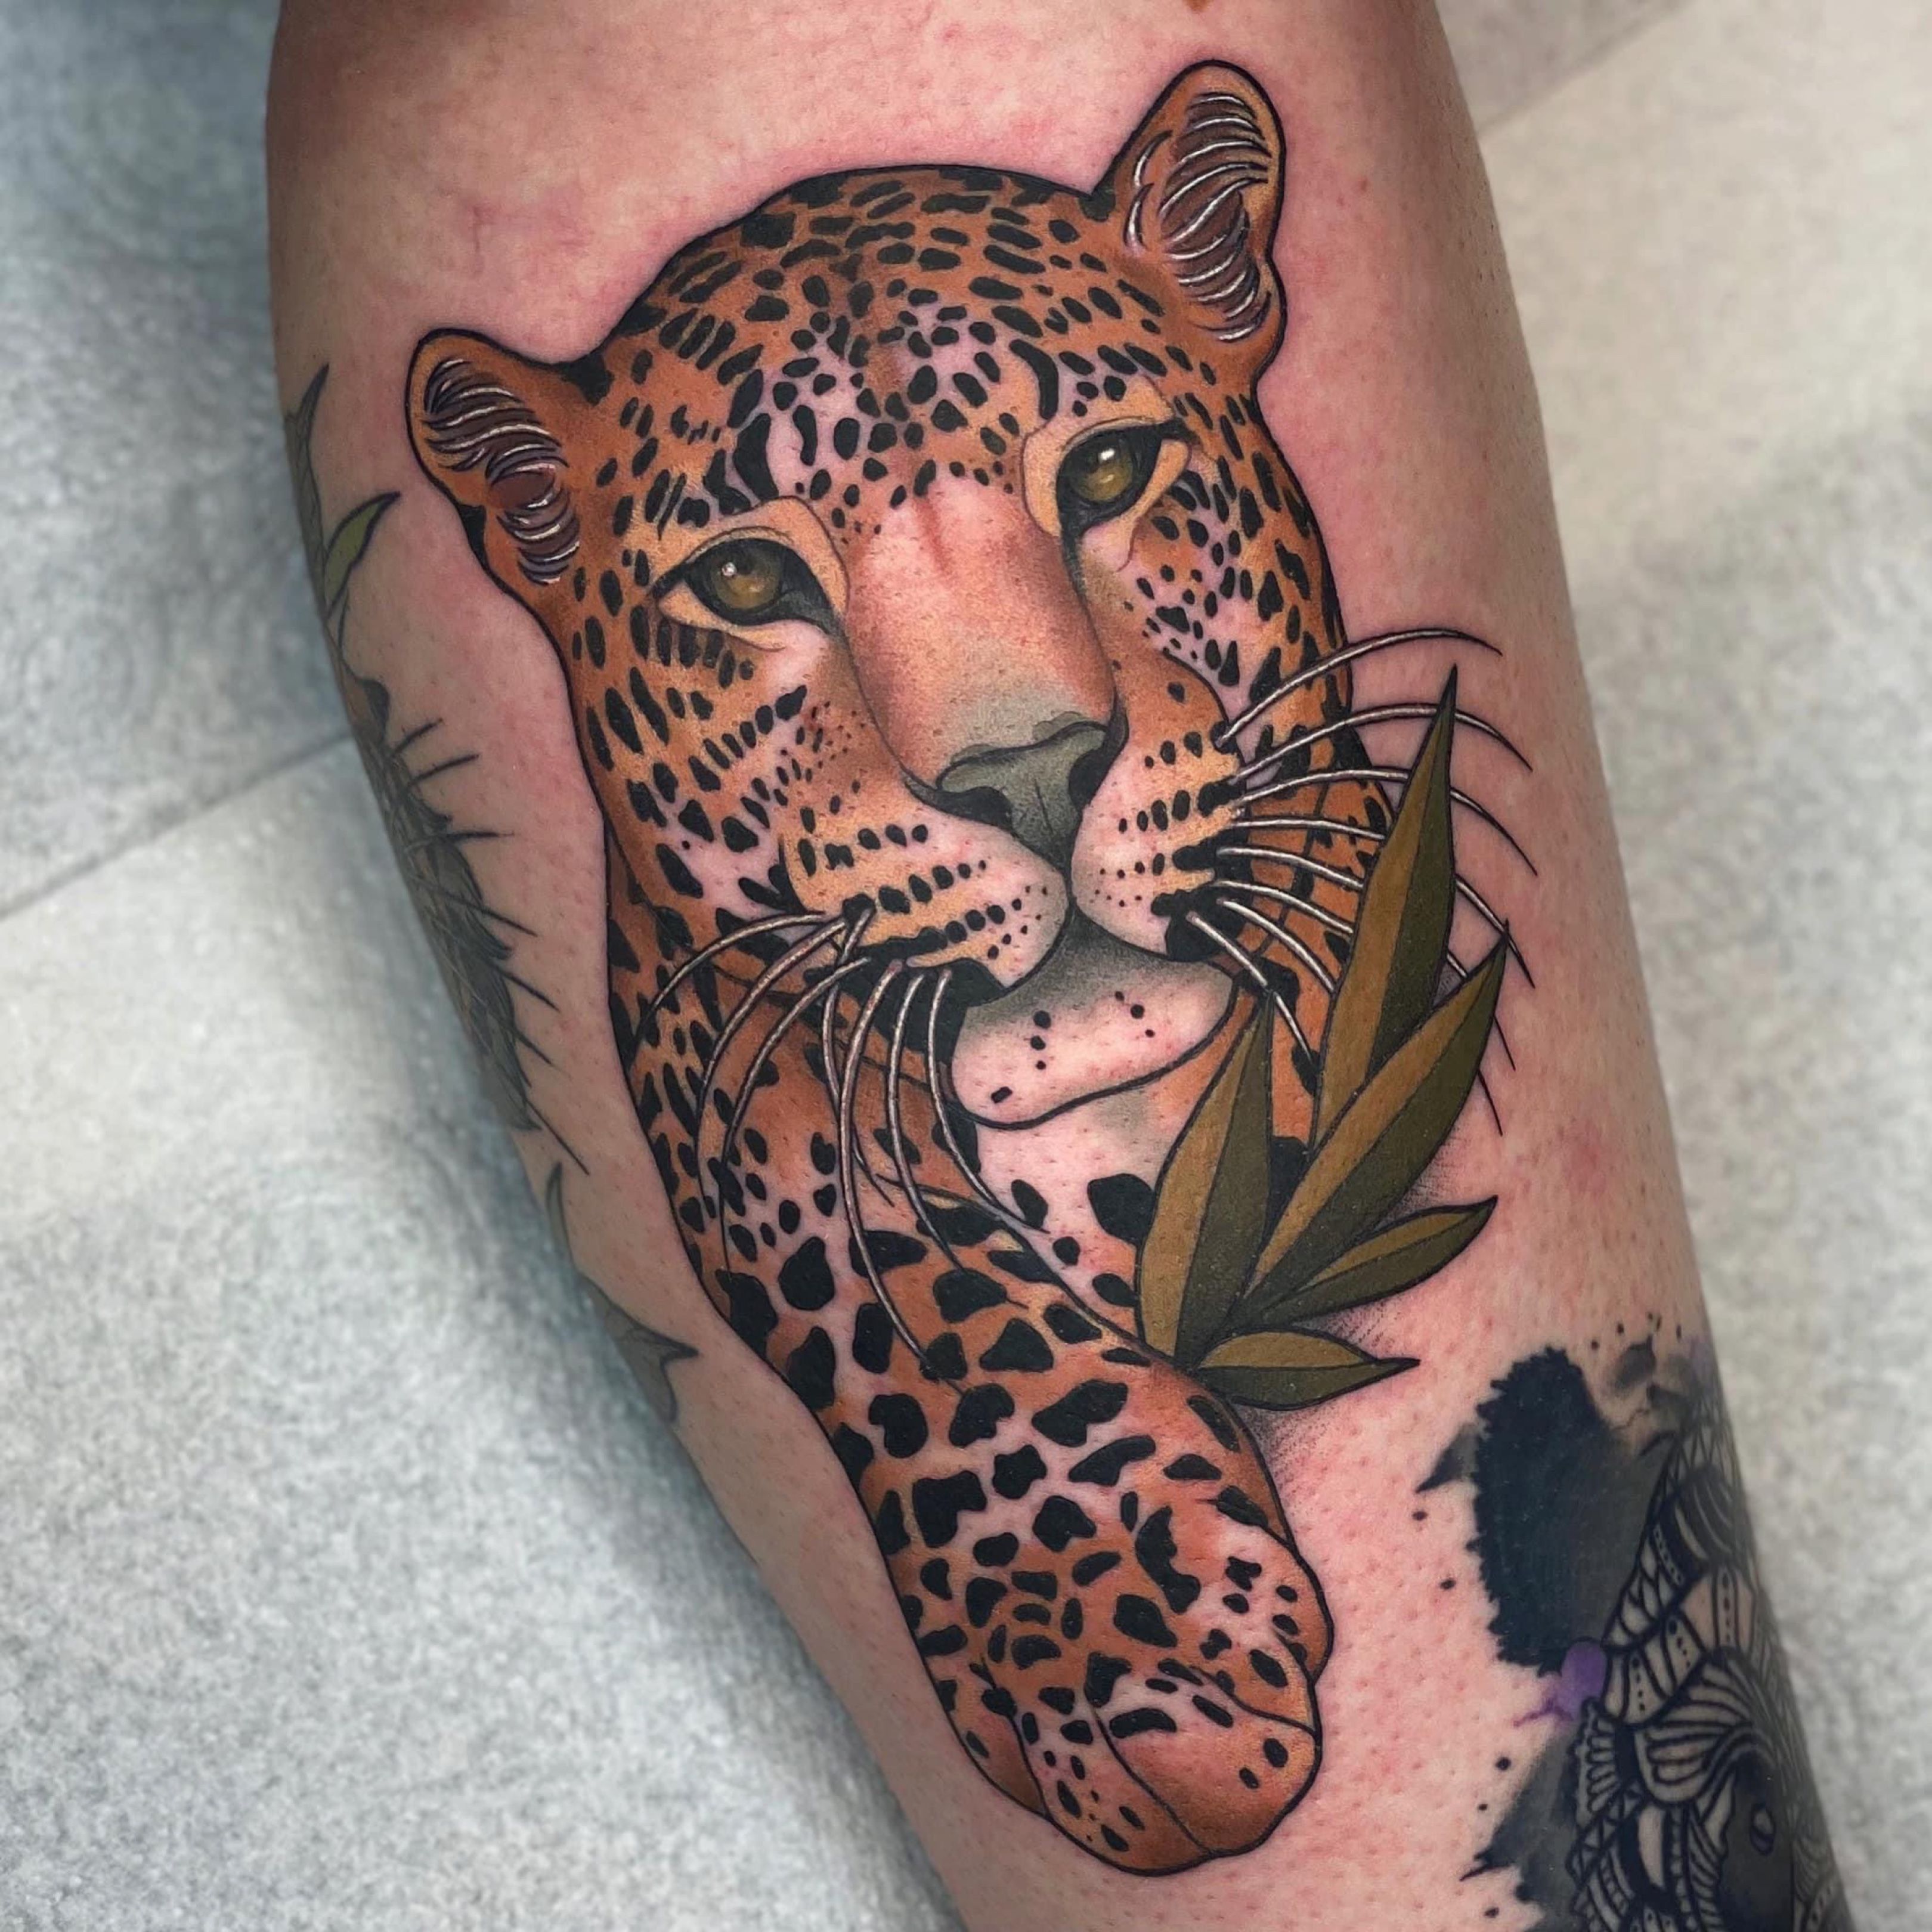 Hardy snow leopard from this week Done by me at 1873 Tattoo Barnsley UK  IGBowleytattoo  rtraditionaltattoos